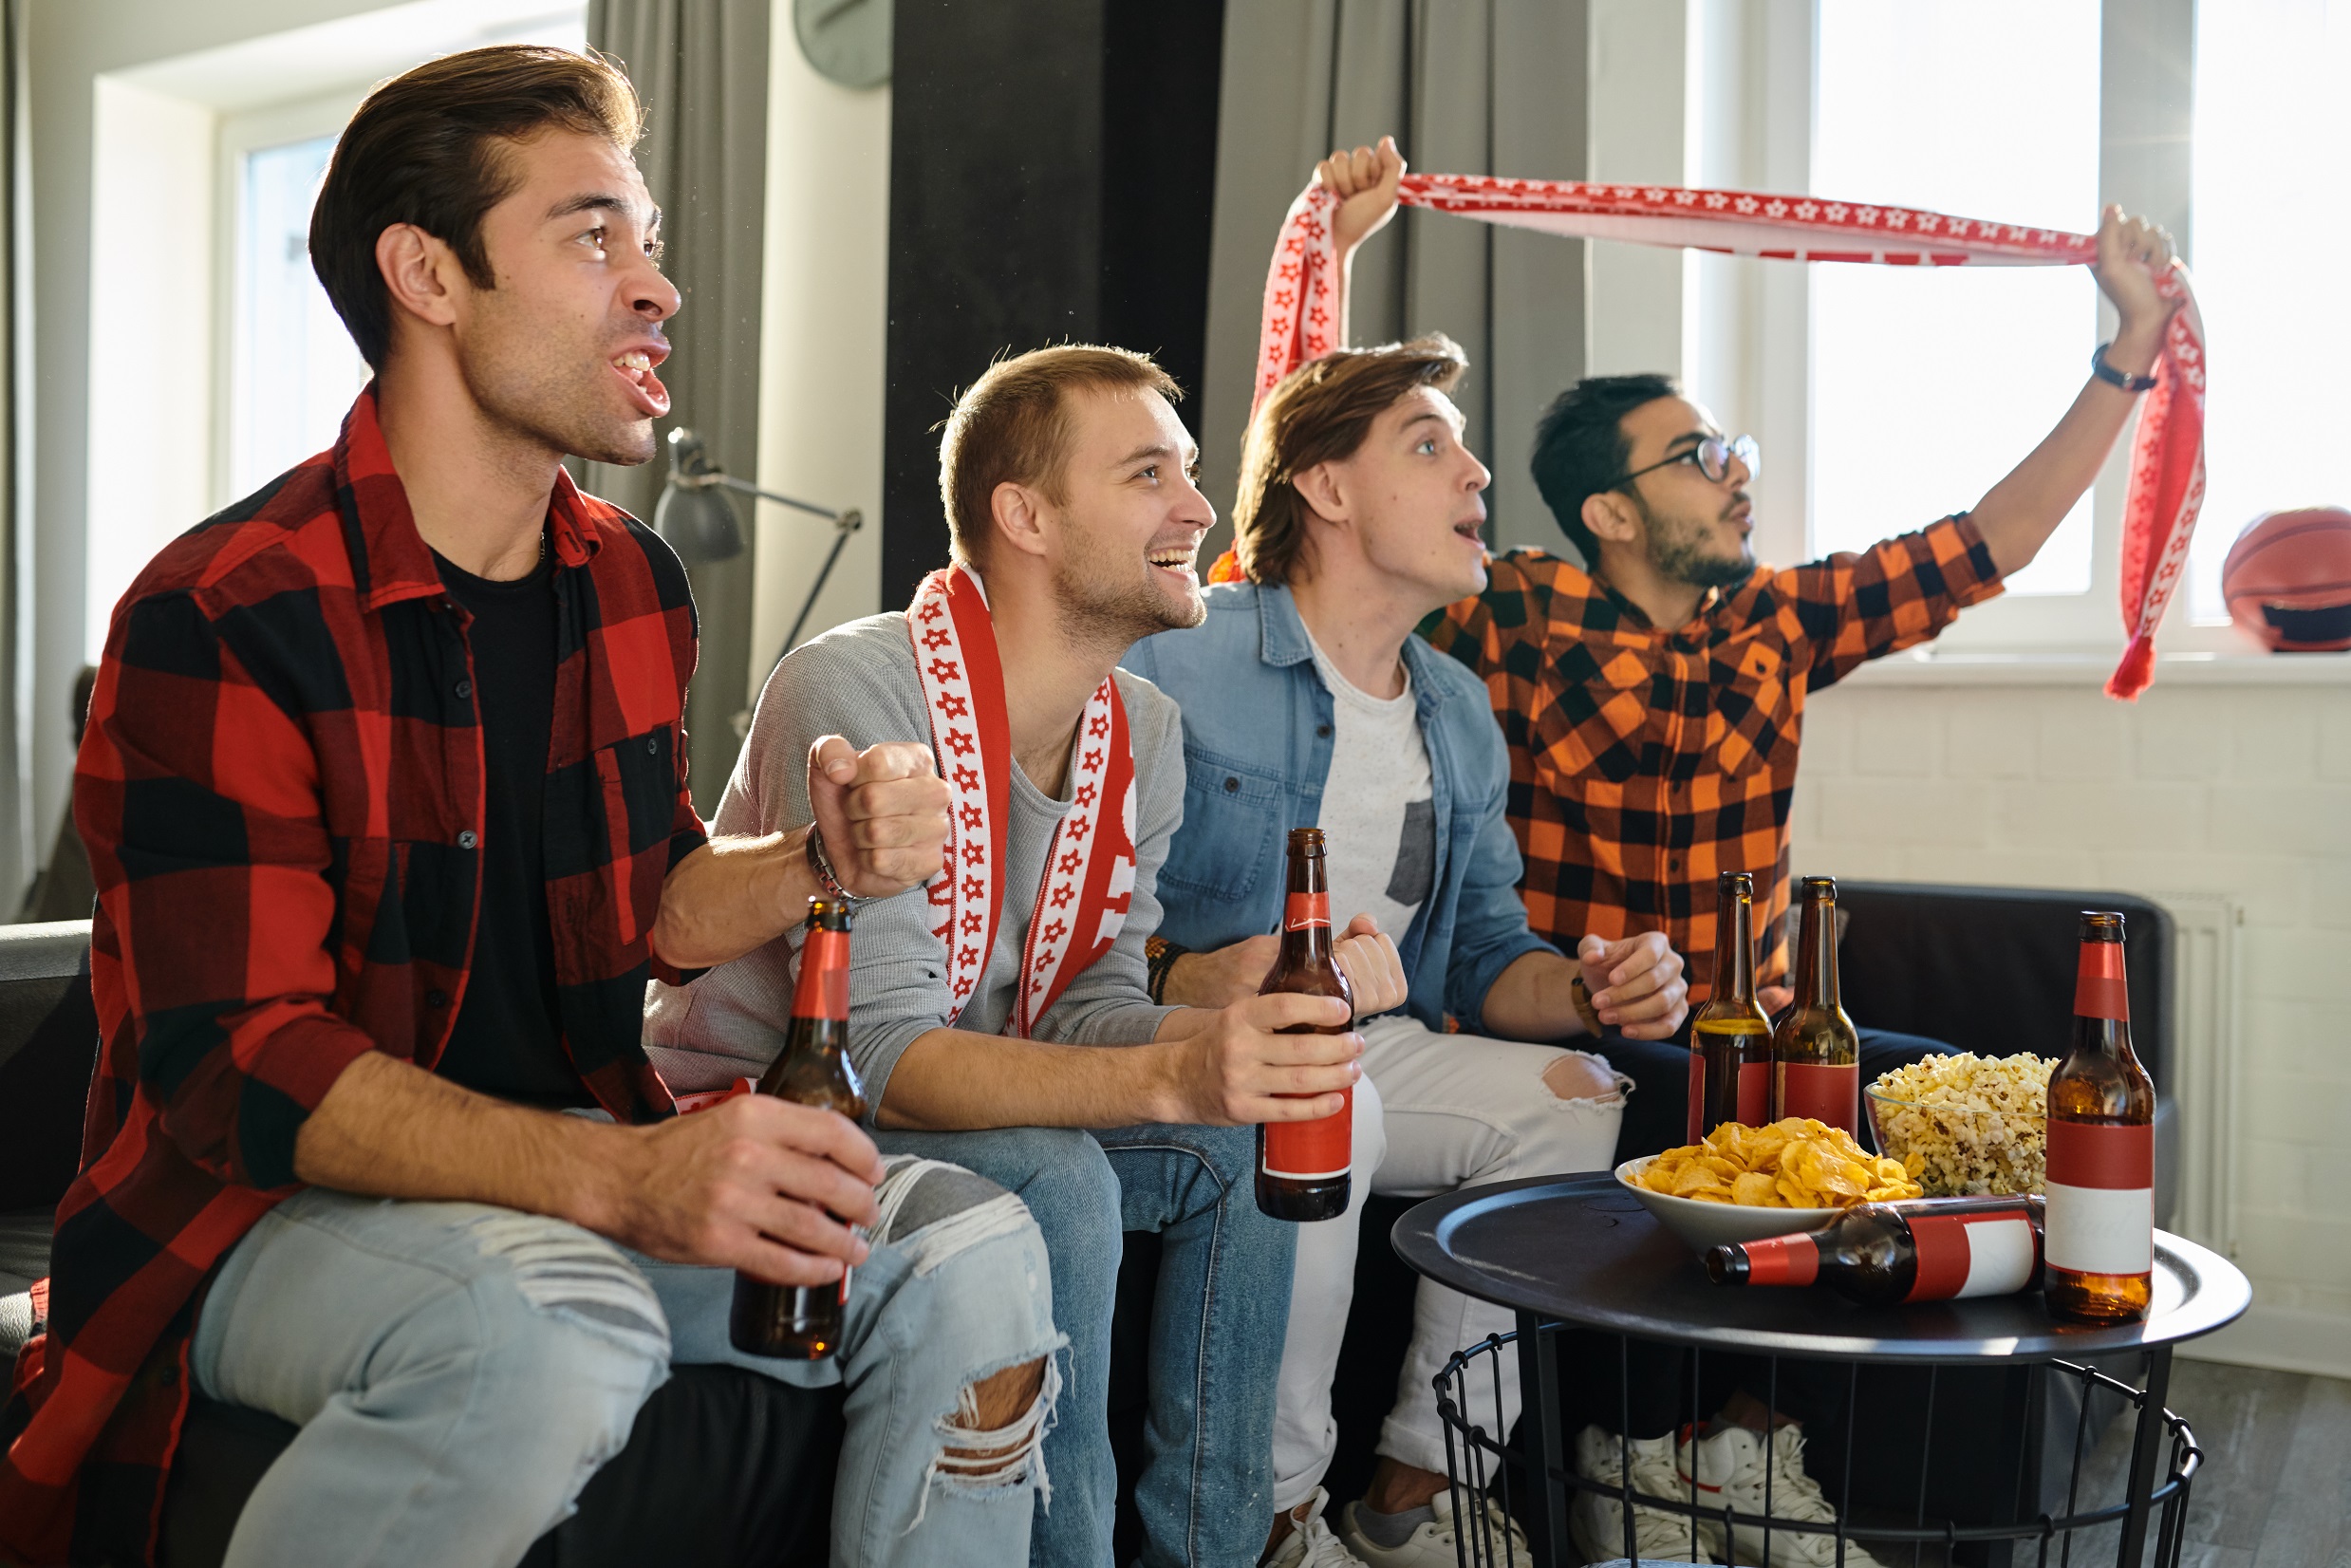 Excited football fans with drinks and food having fun by watching football match at home